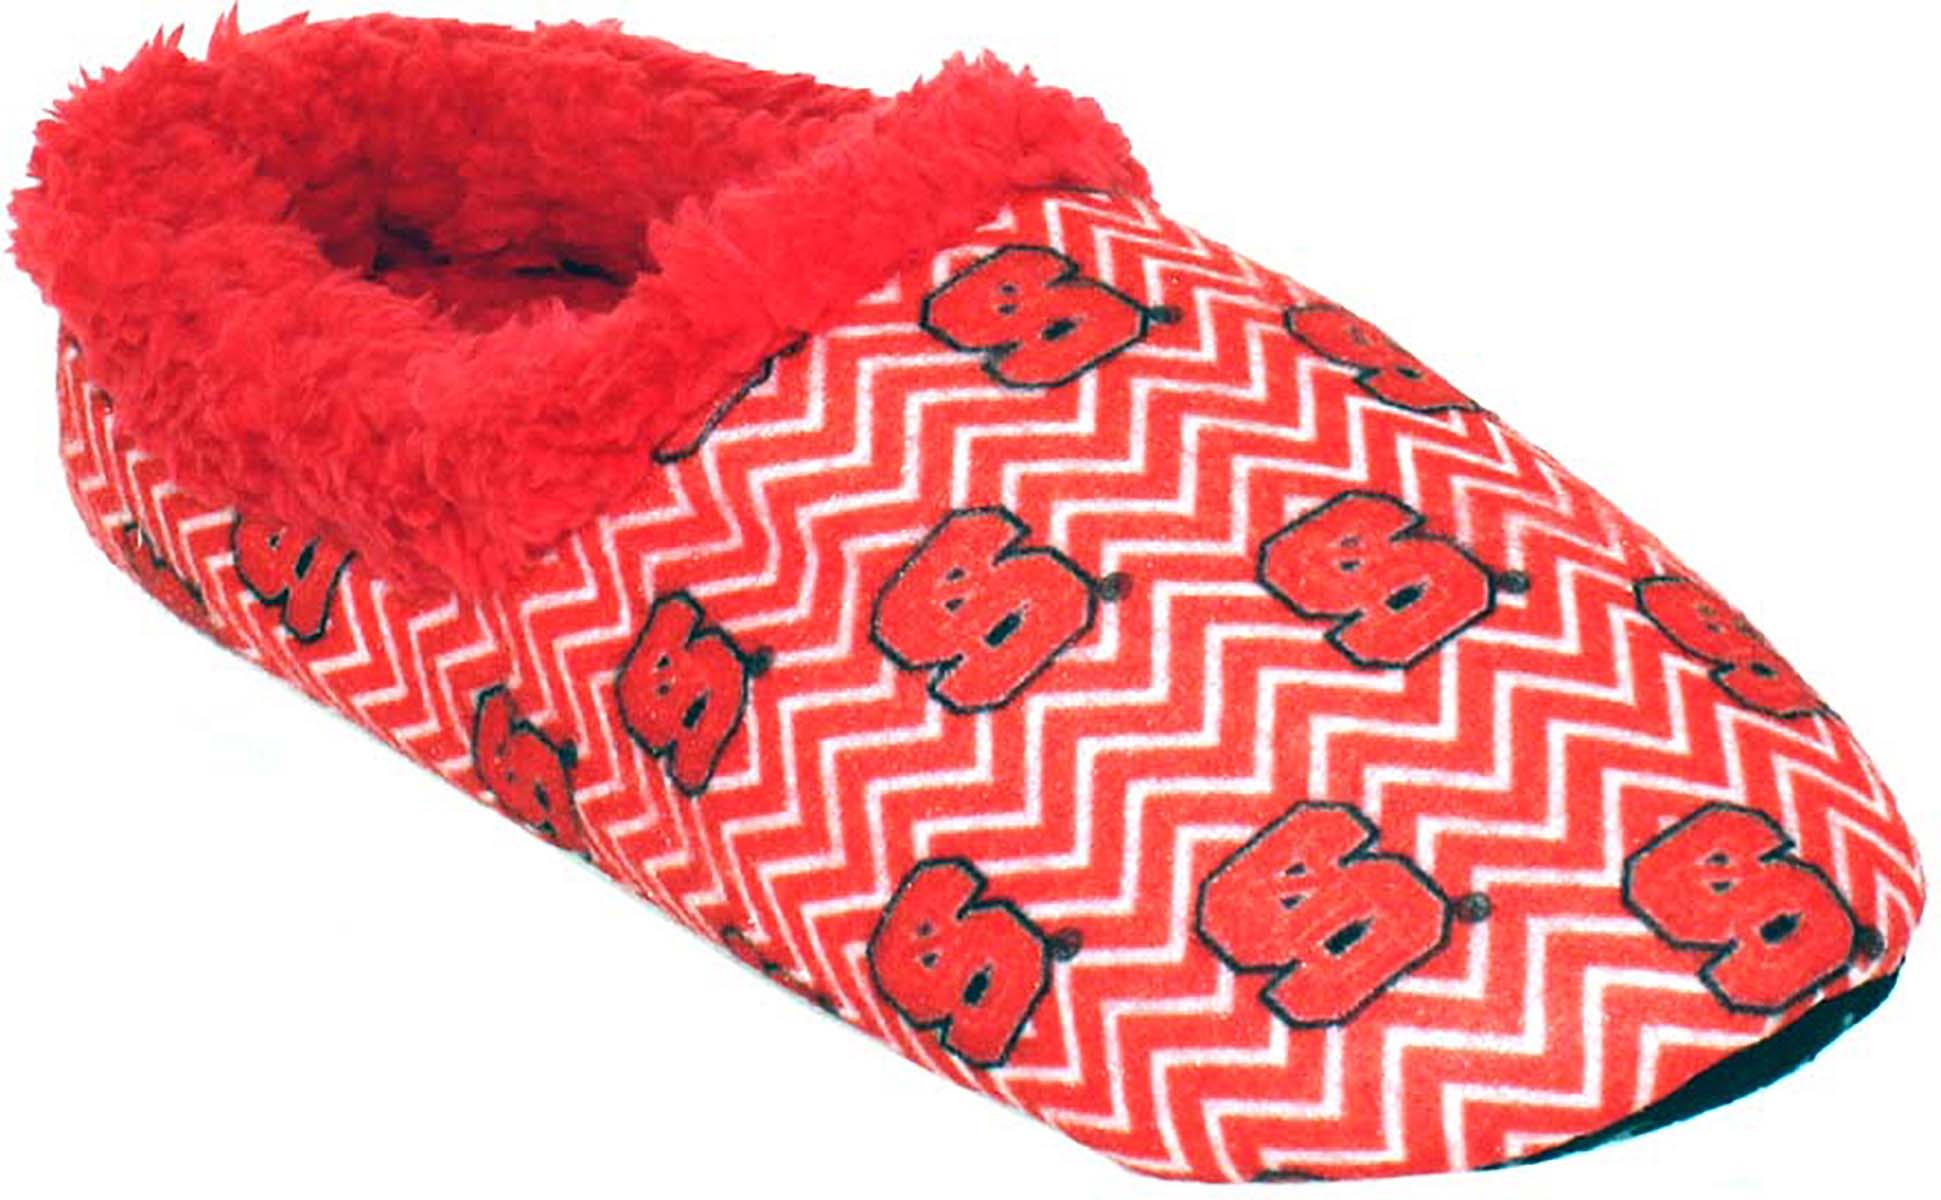 Comfy Feet Everything Comfy NC State Wolfpack Chevron Slip On Slipper LG - image 1 of 5